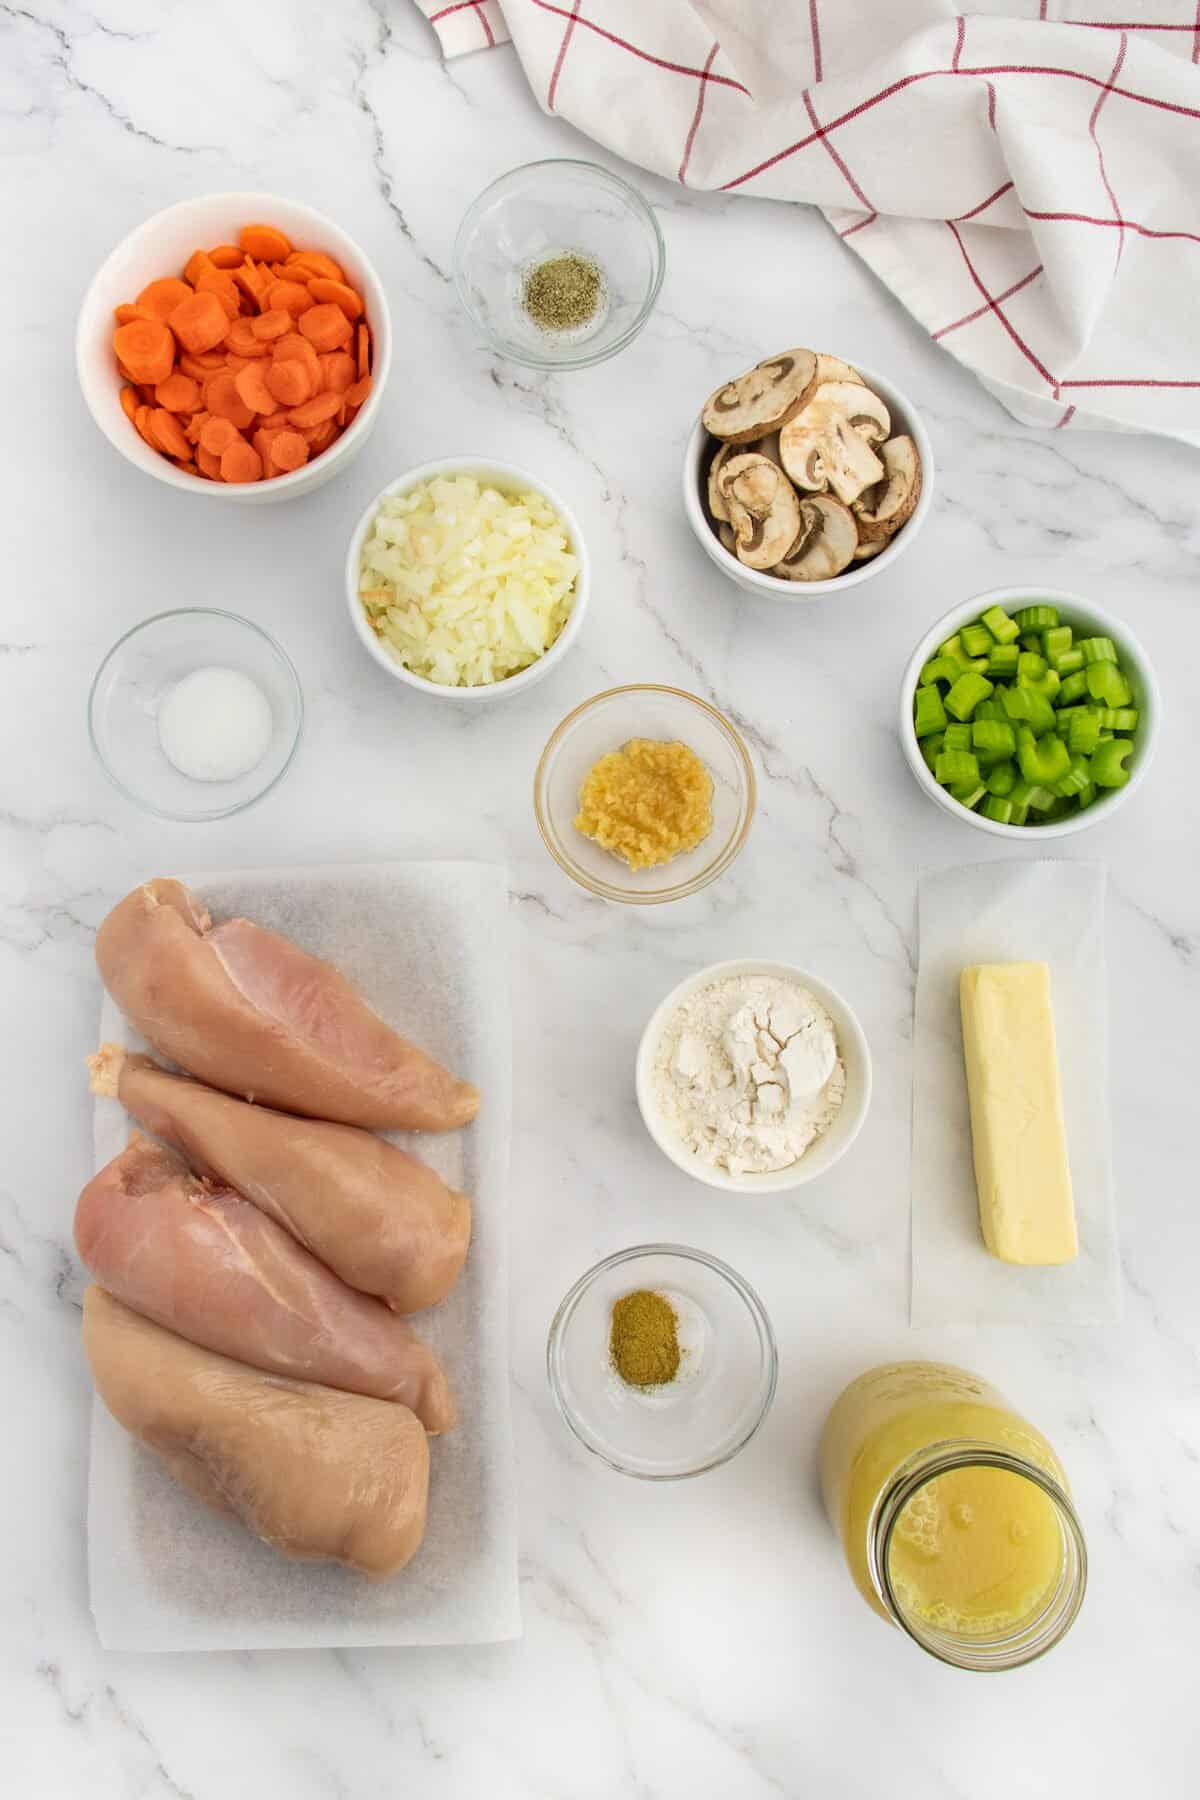 Smothered chicken ingredients